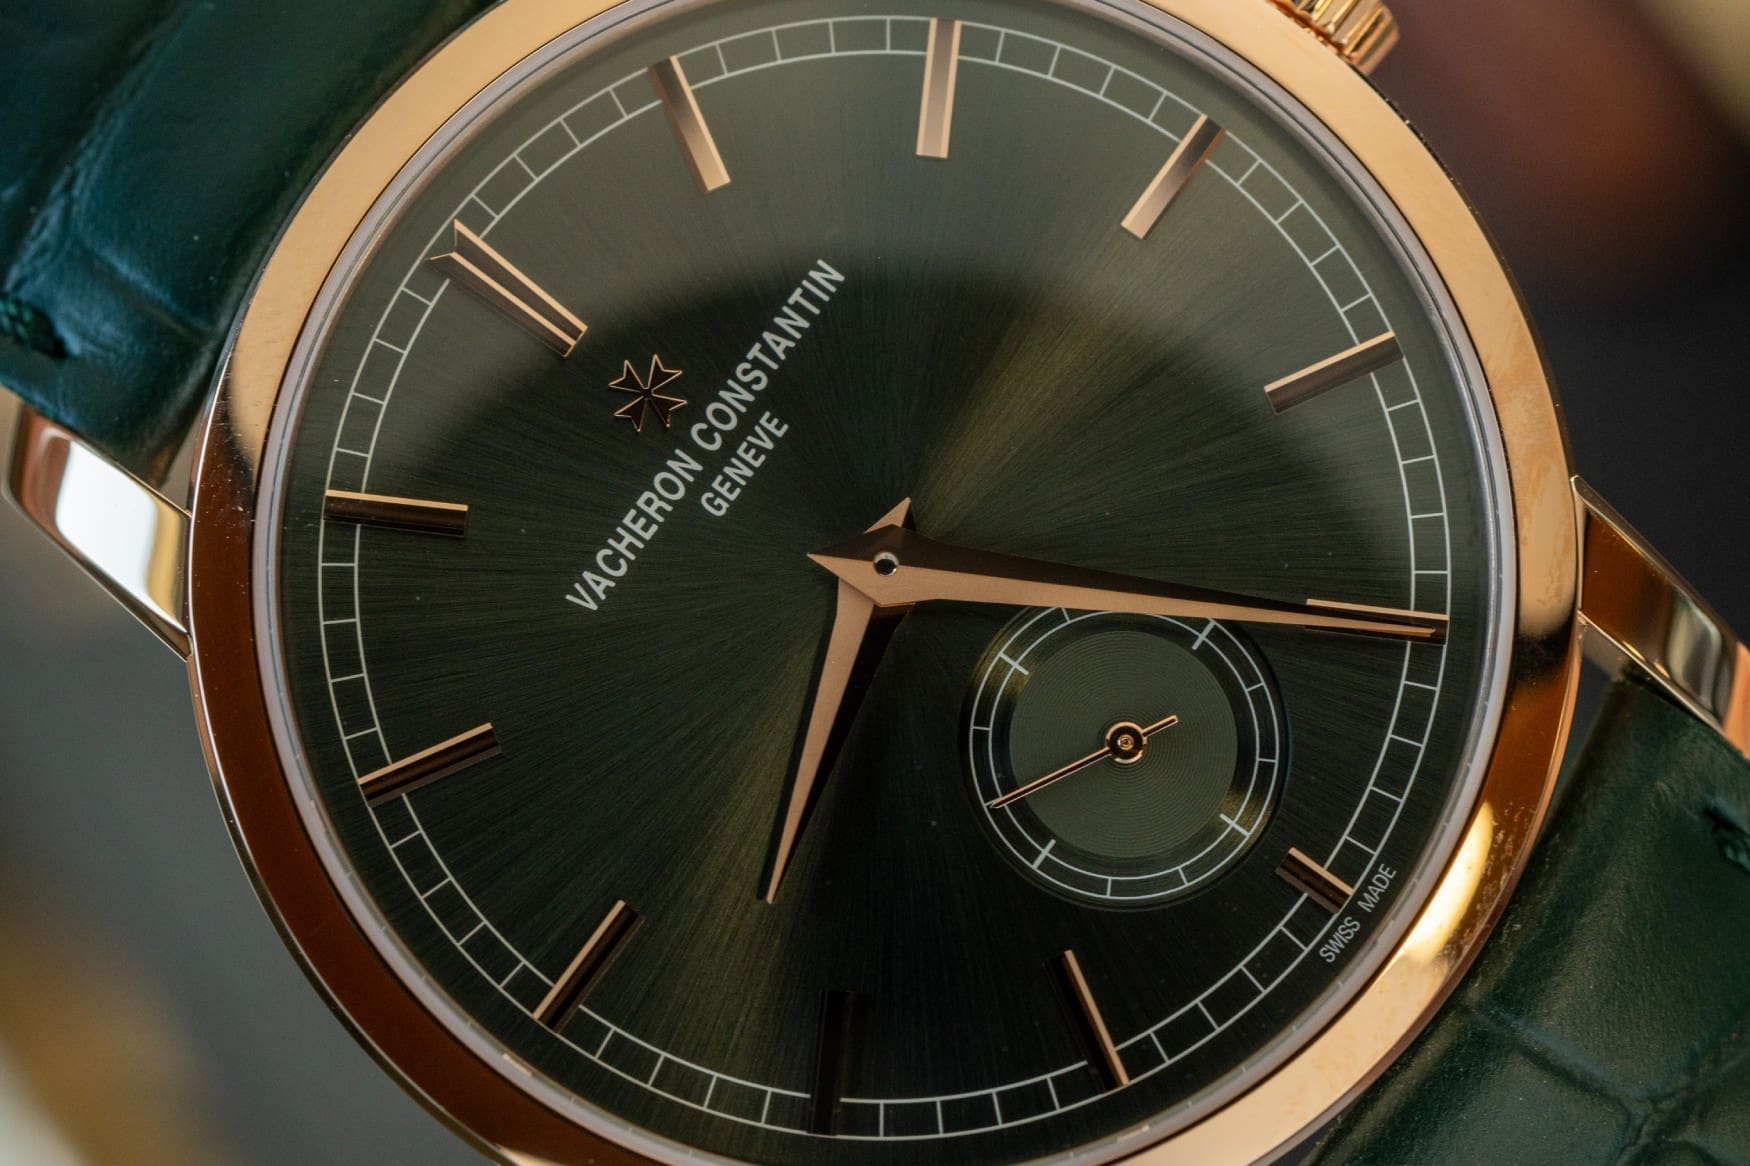 vacheron constantin traditionnelle manual winding green dial close up